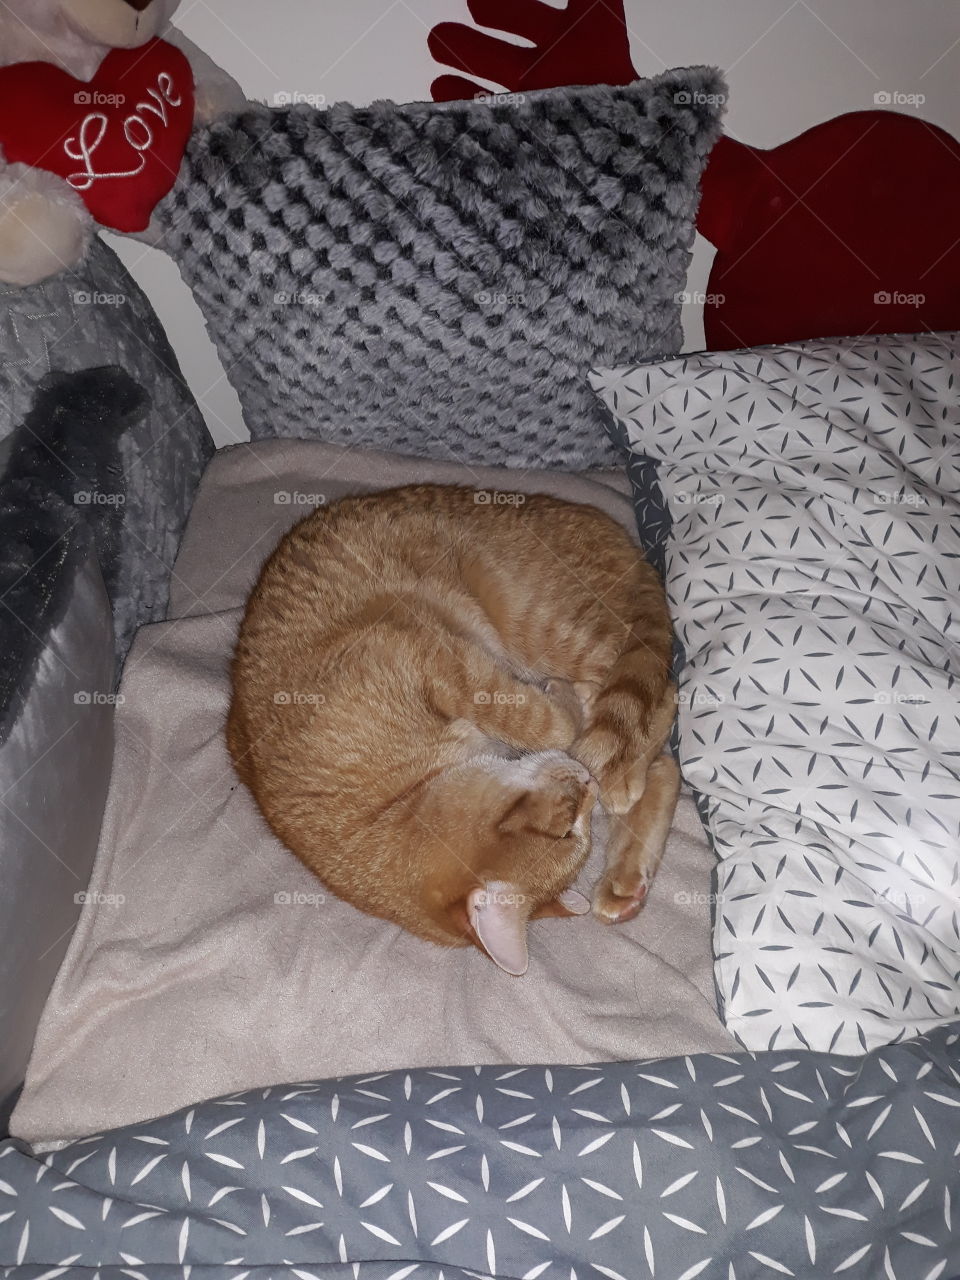 sleeping cat, sleeping hard, striped cat, striped pillow, pillow, colour pillow, good night, sleeping, sleapy cat, good mood, night sight, view, cat, home cat, pet, pets, indoor cat, indoor, fatty pillow, dreams, dream and sleeping